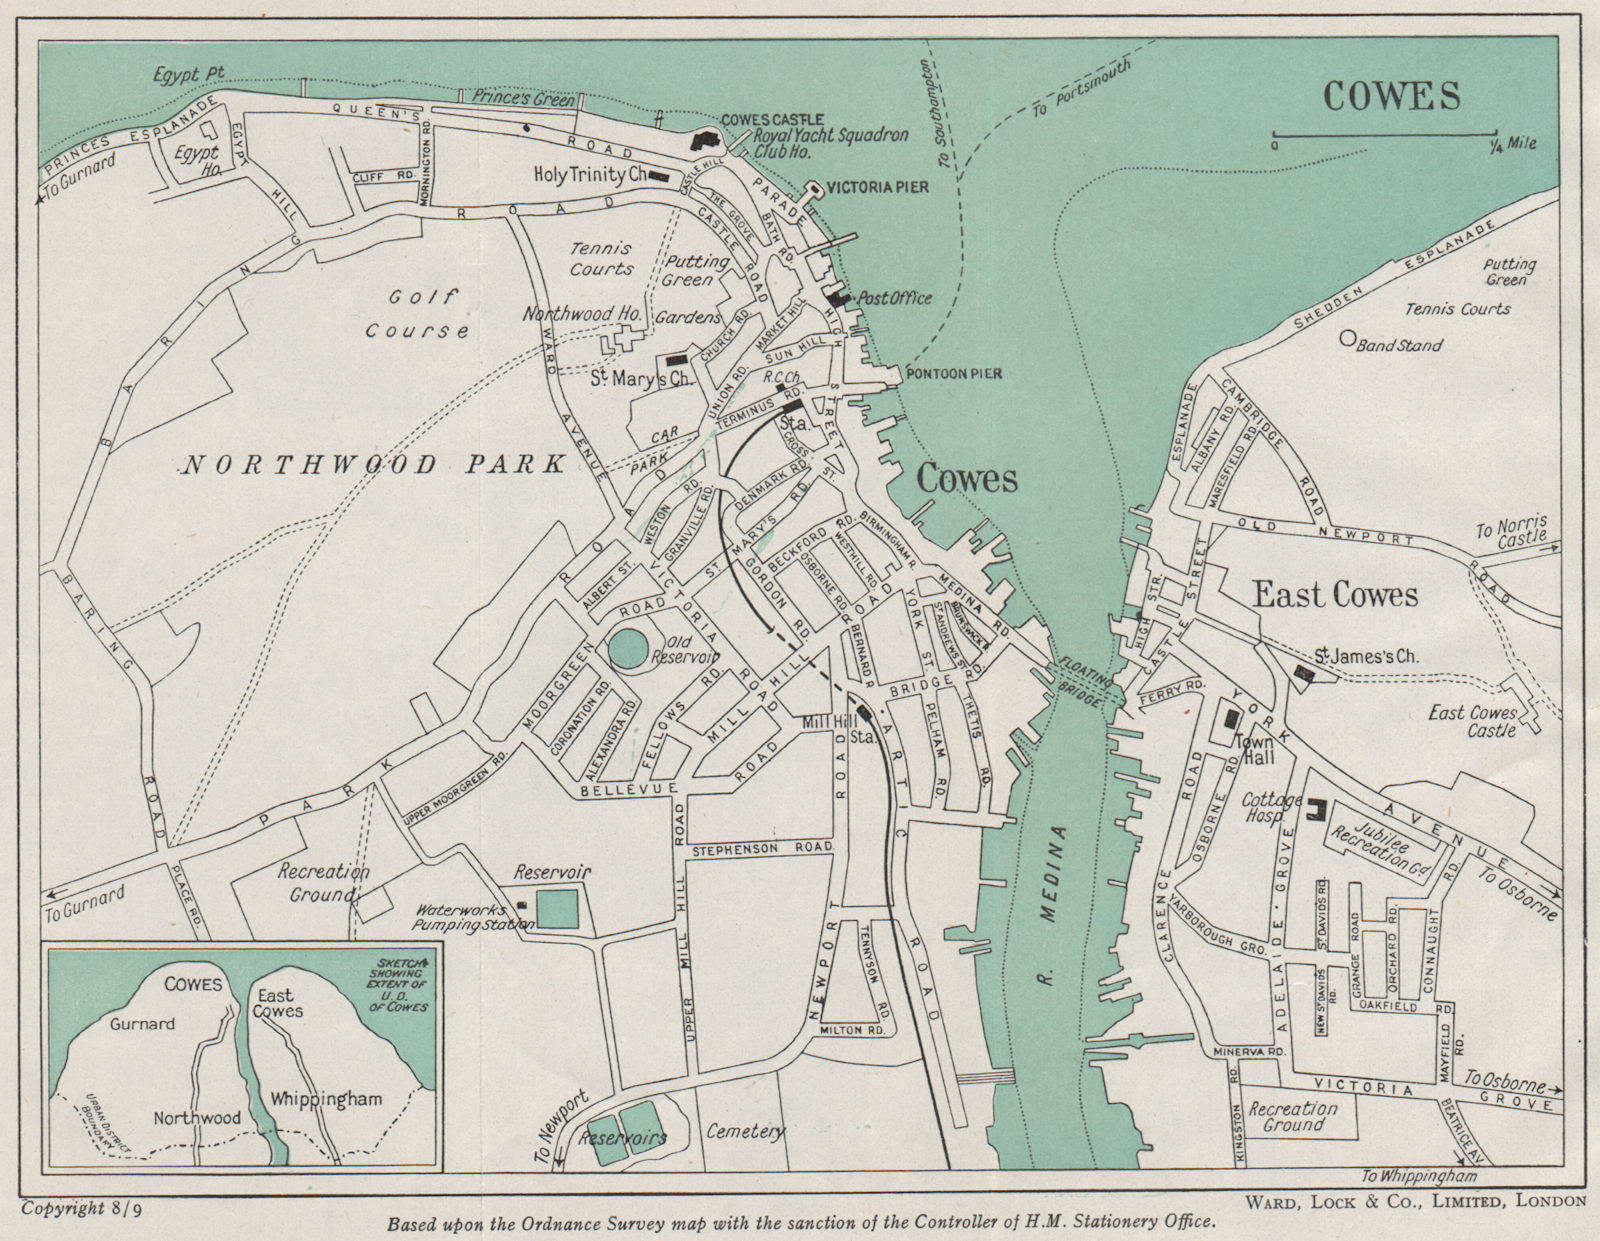 Associate Product COWES vintage town/city plan. Isle of Wight. WARD LOCK 1948 old vintage map